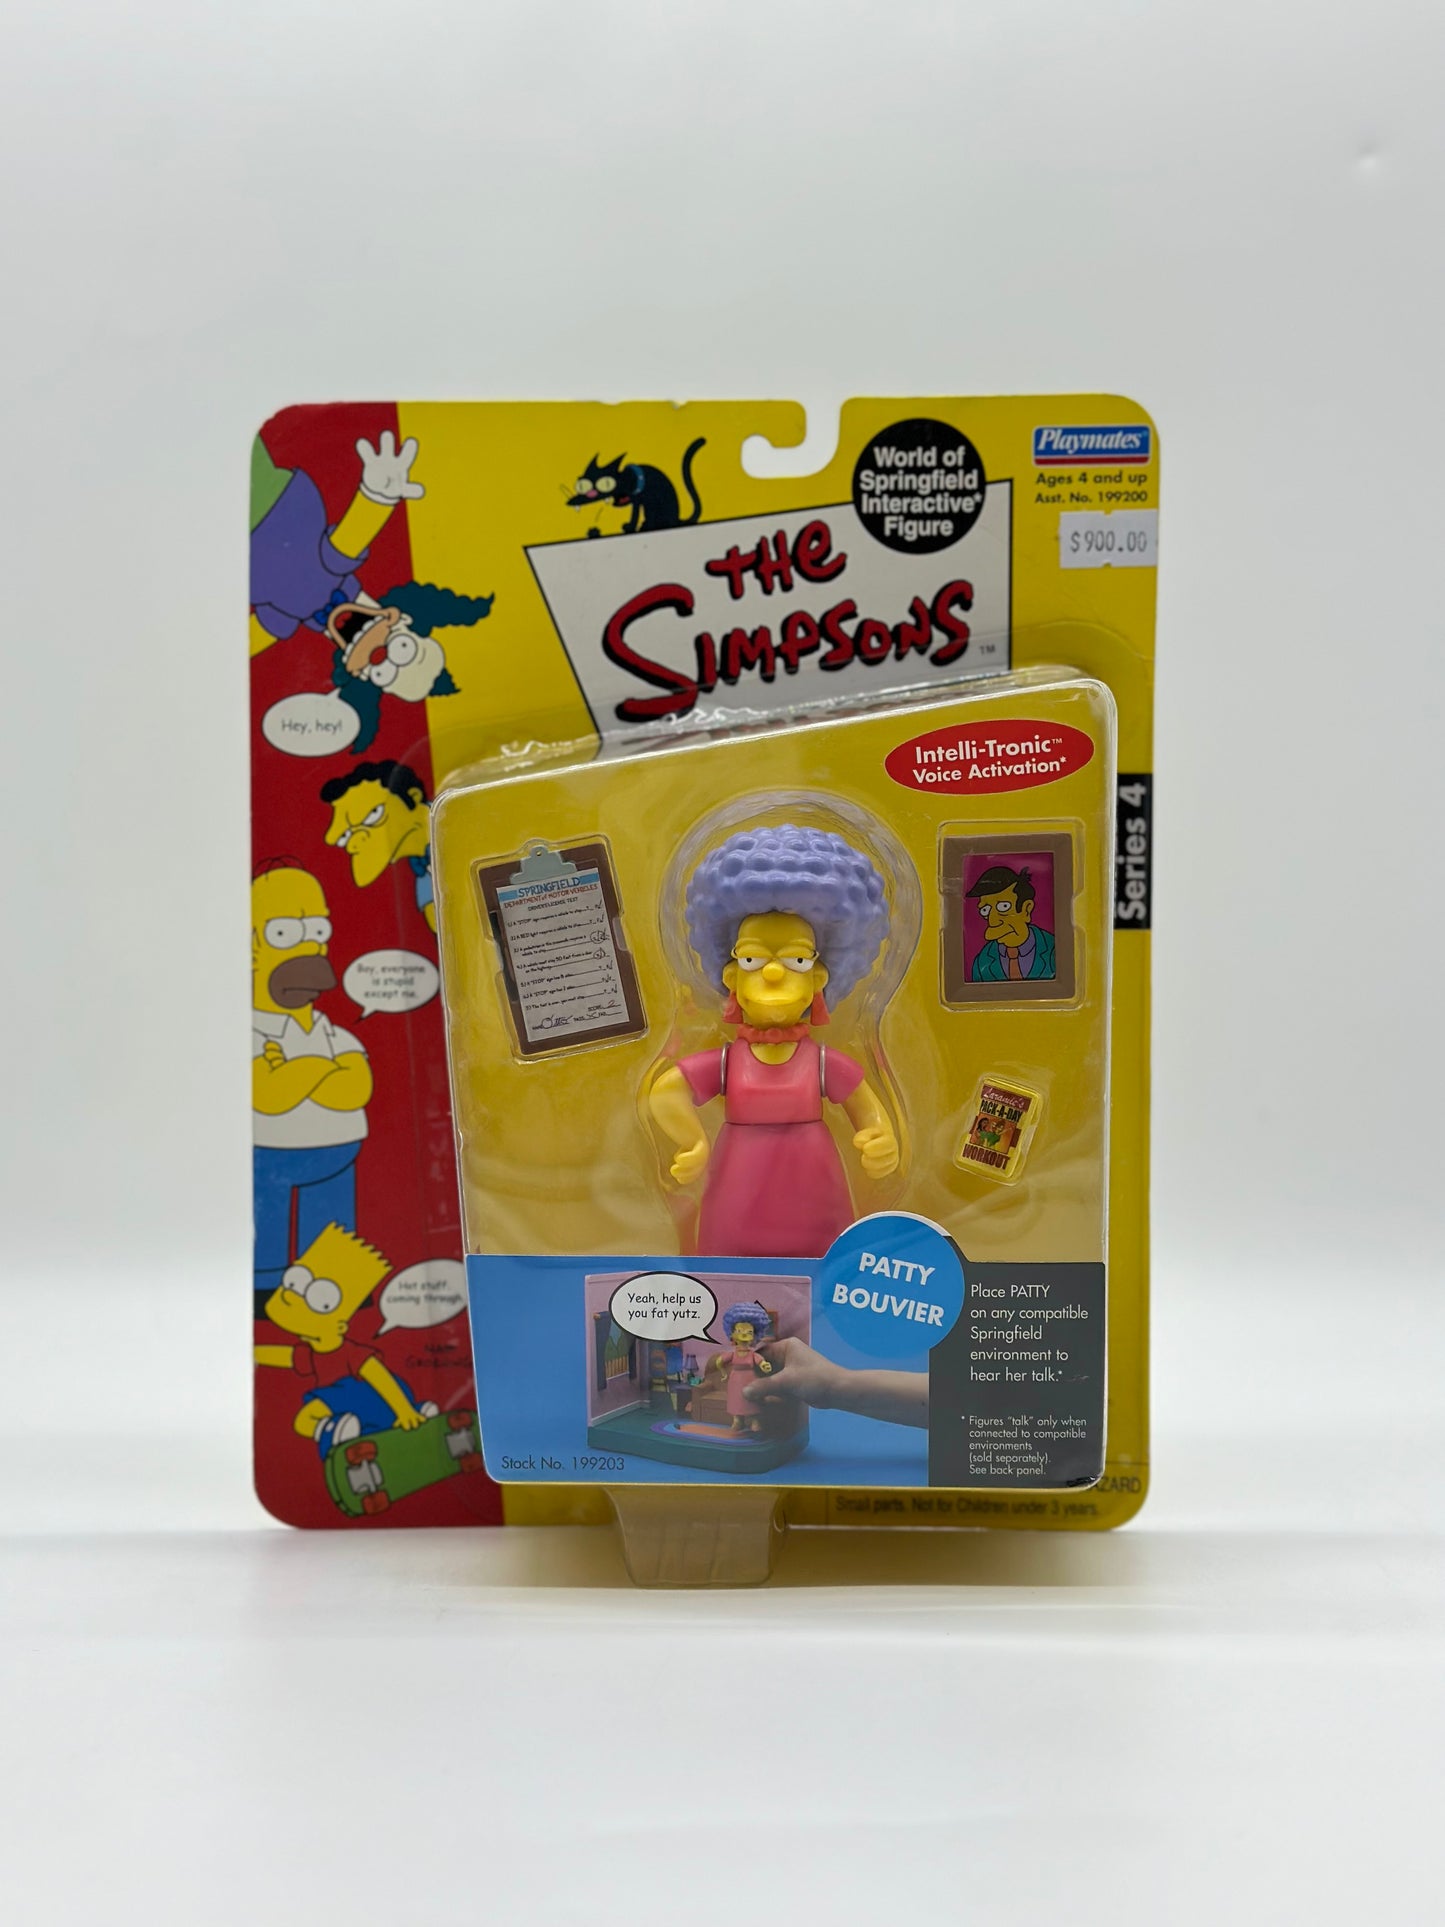 The Simpsons World Of Springfield Interactive Figure Patty Bouvier